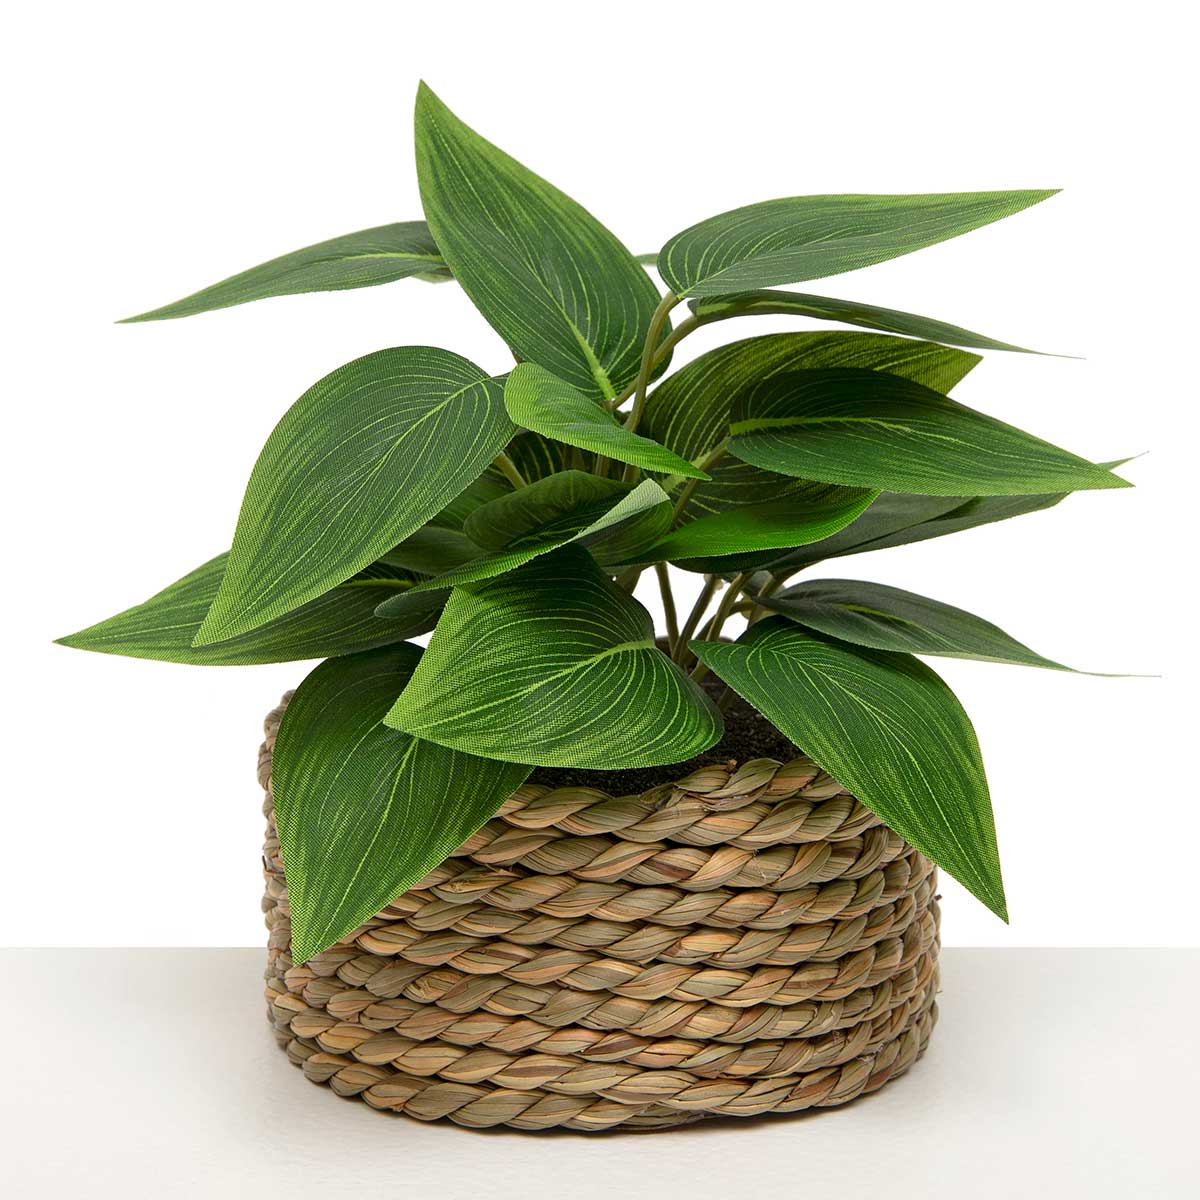 PHILODENDRON IN BASKET 6IN X 5IN (3.75IN X 2IN POT)